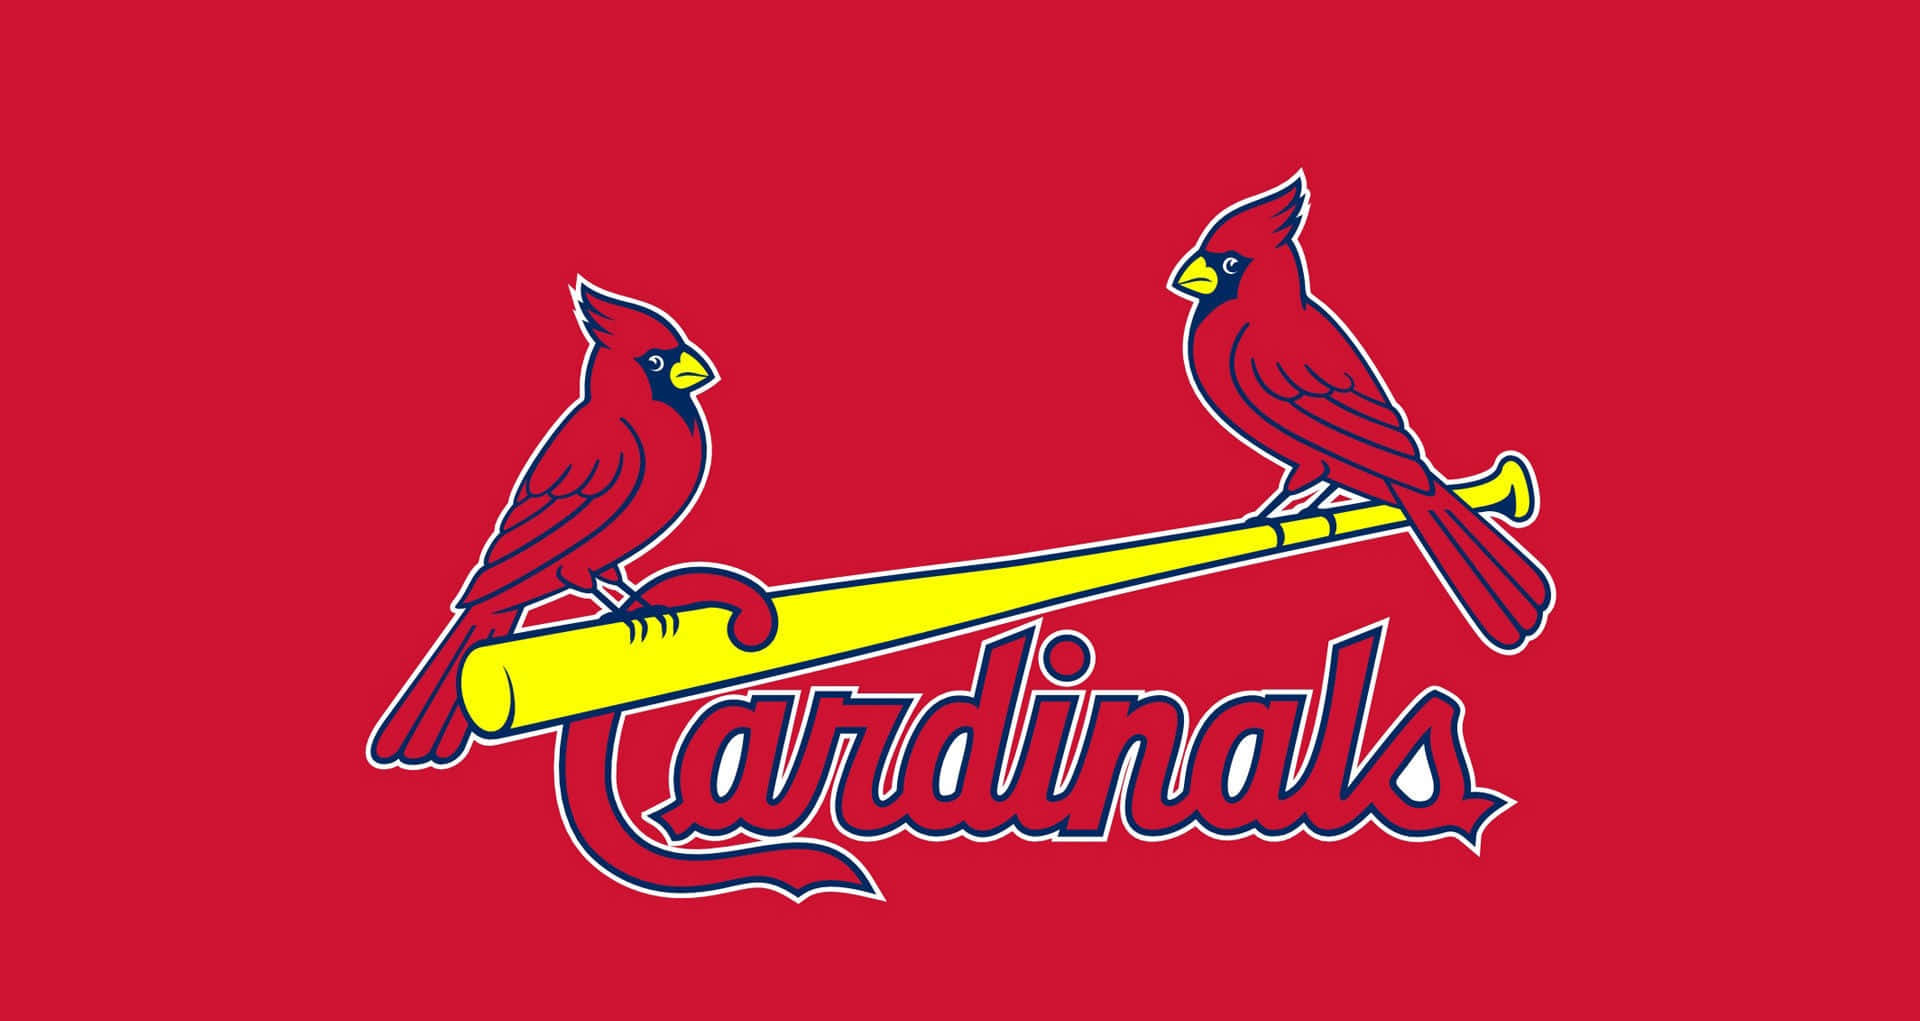 Exciting MLB Teams Collage on Wallpaper. Wallpaper